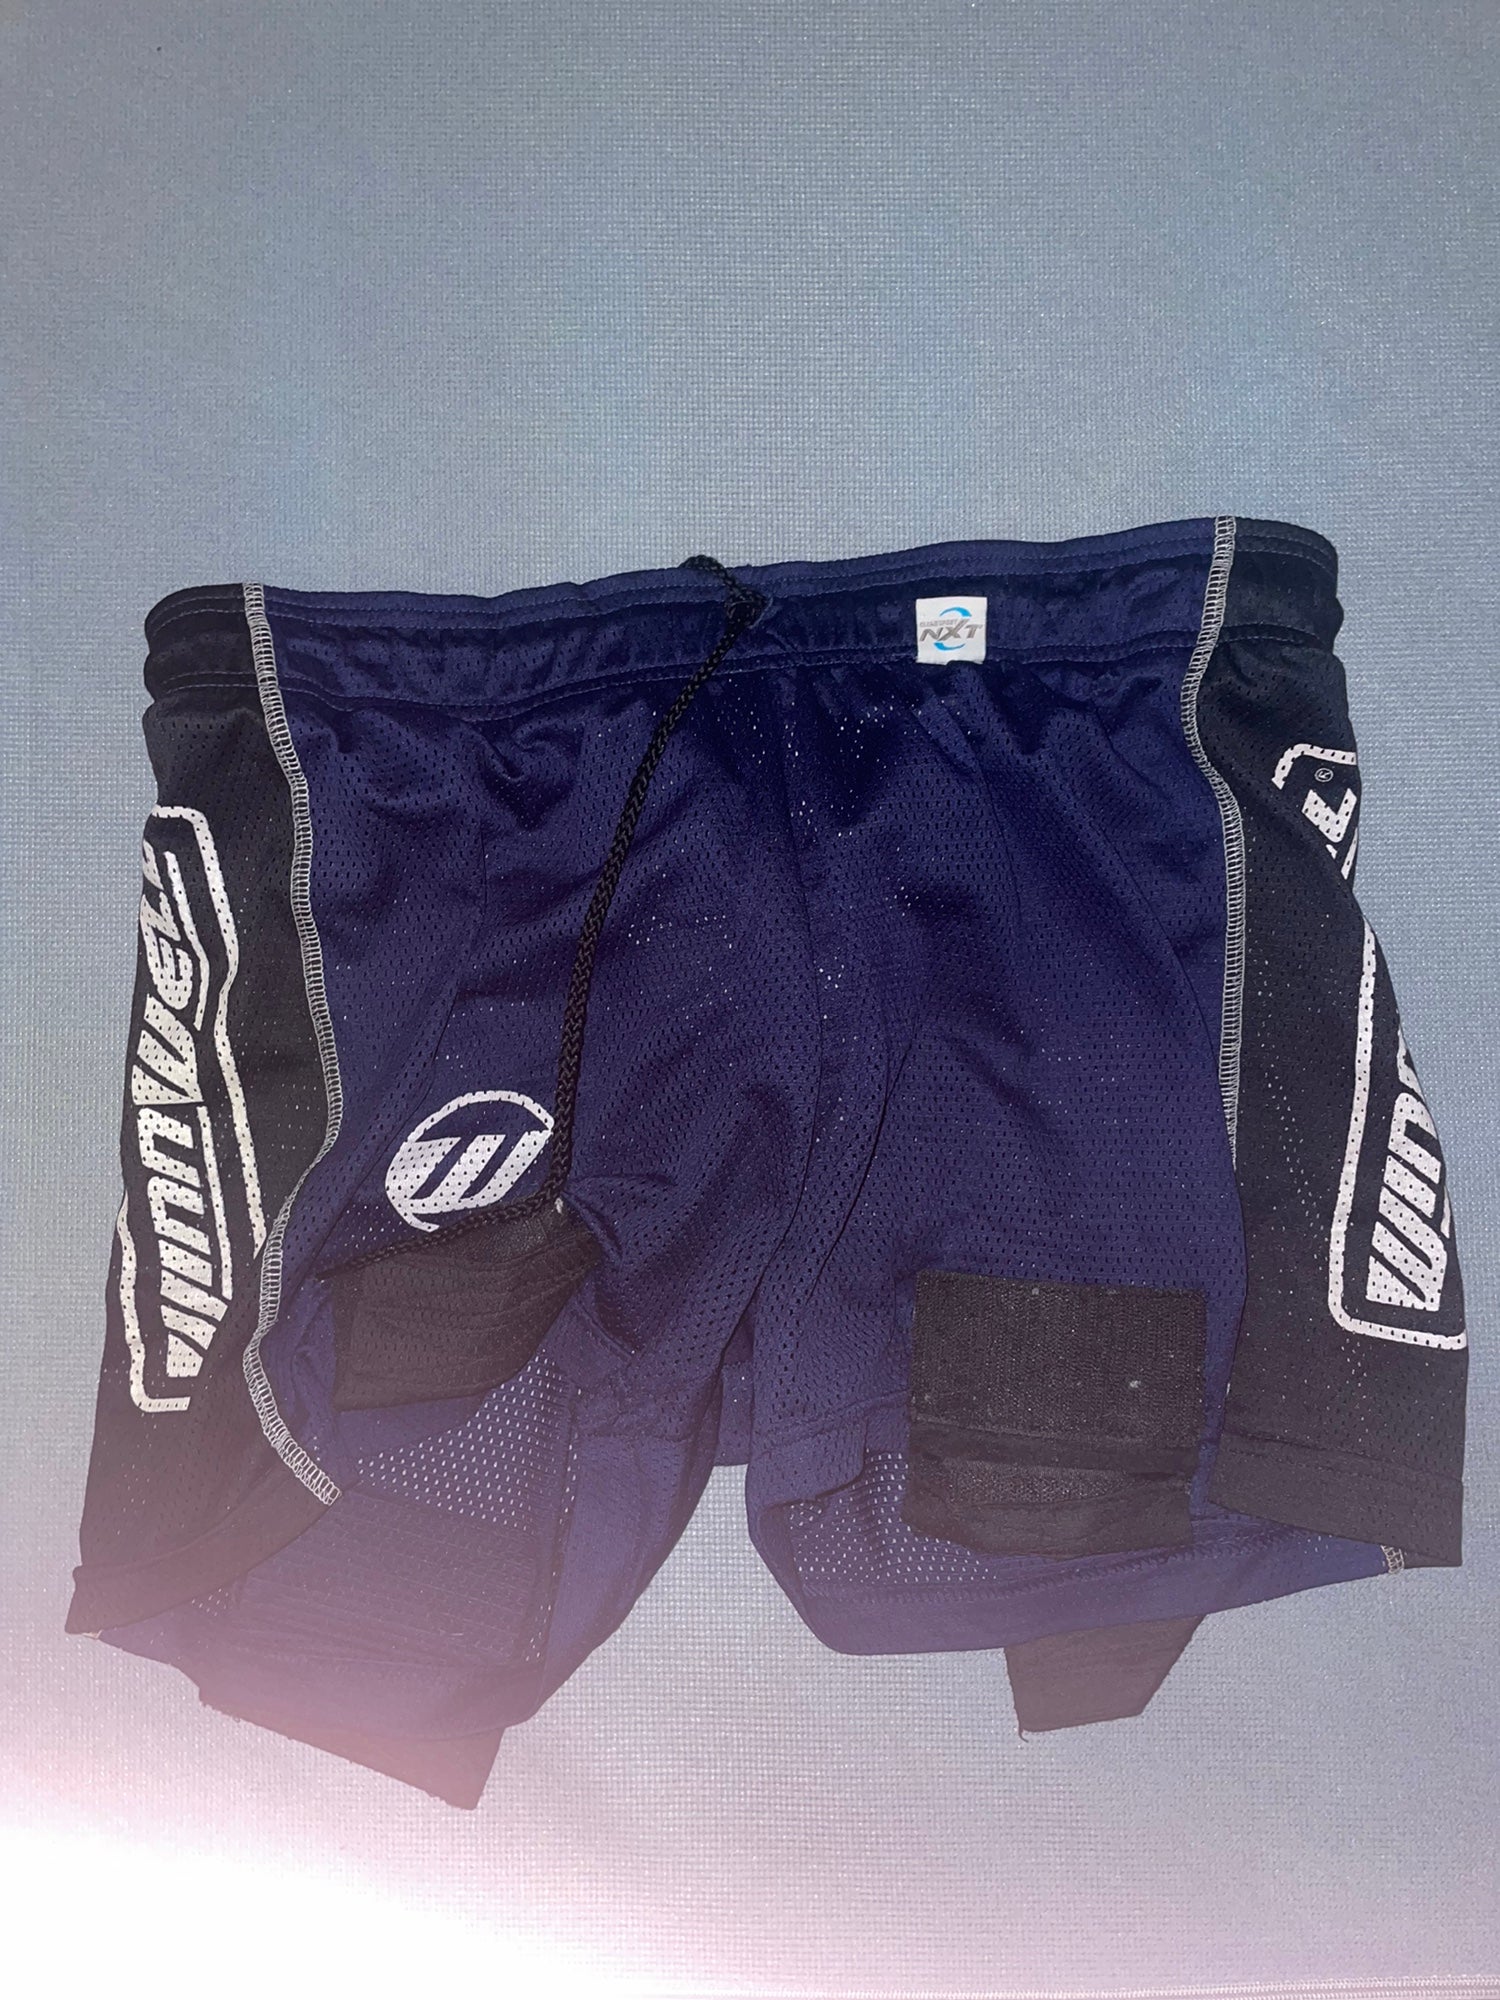 Junior-Large TronX Junior Boys Loose Fit Ice-Hockey Mesh Jock Shorts with Cup 